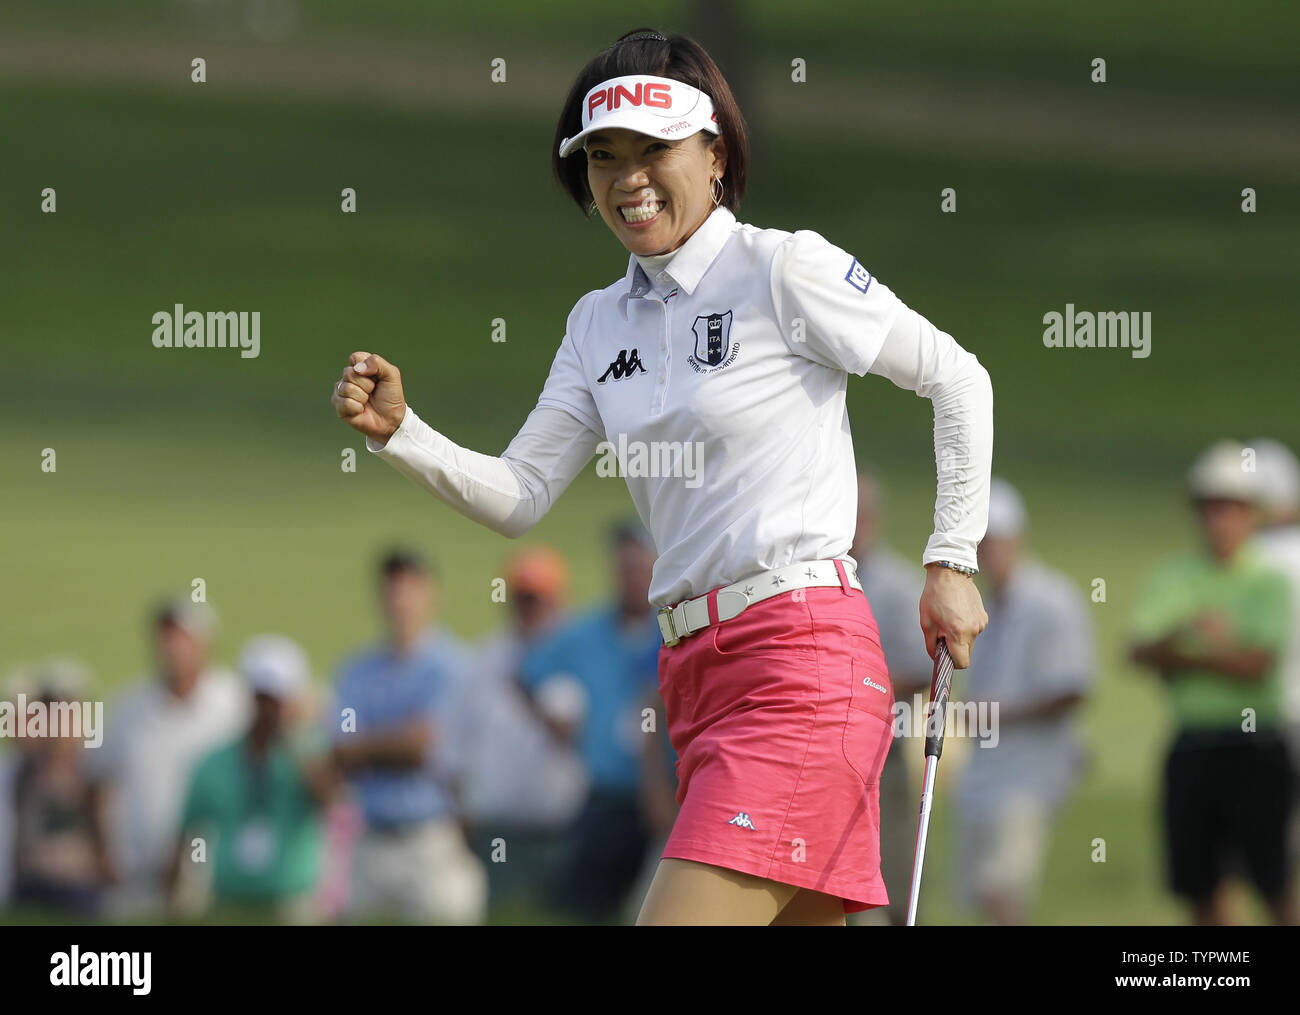 Shiho Oyama of Japan celebrates after making a putt for birdie on the 16th hole in the final round of the LPGA U.S. Women's Open Championship at Lancaster Country Club in Lancaster, PA on July 12, 2015. In Gee Chun of Korea wins the U.S. Women's Open and her first LPGA major championship with a score of 8 under par.     Photo by John Angelillo/UPI Stock Photo